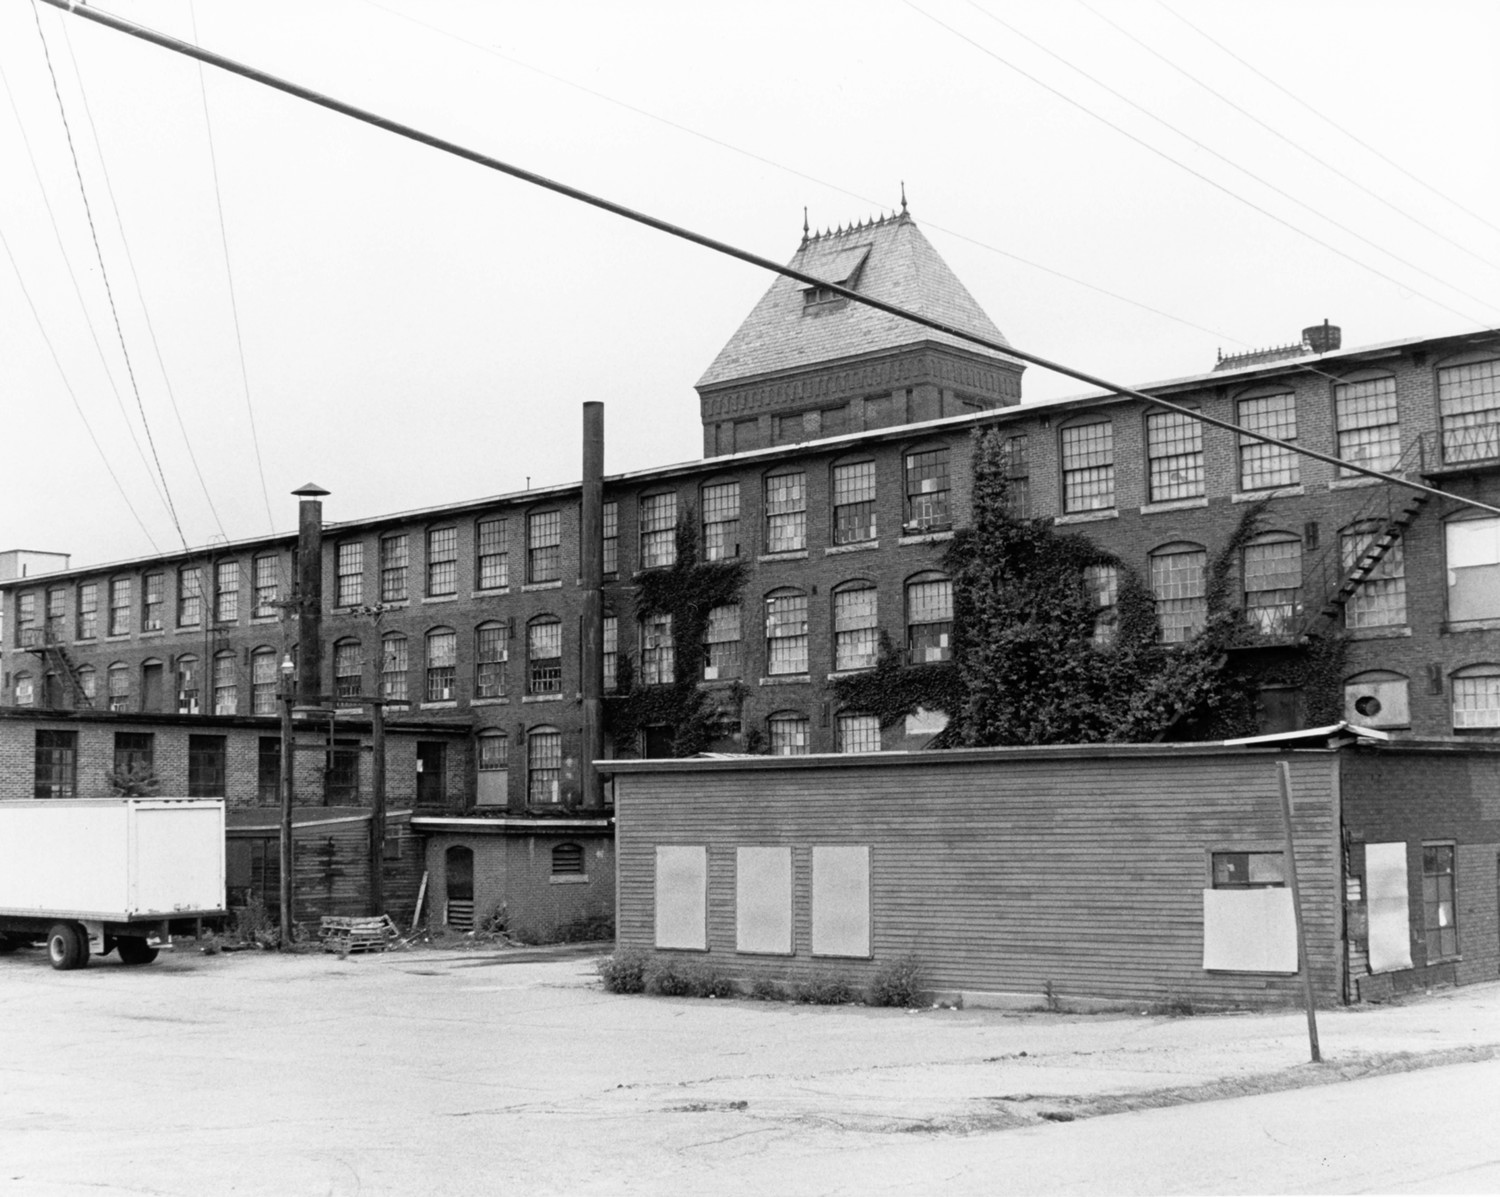 Hoyt Shoe Company Factory, Manchester New Hampshire Looking north at rear elevation of Factory 2 (1985)